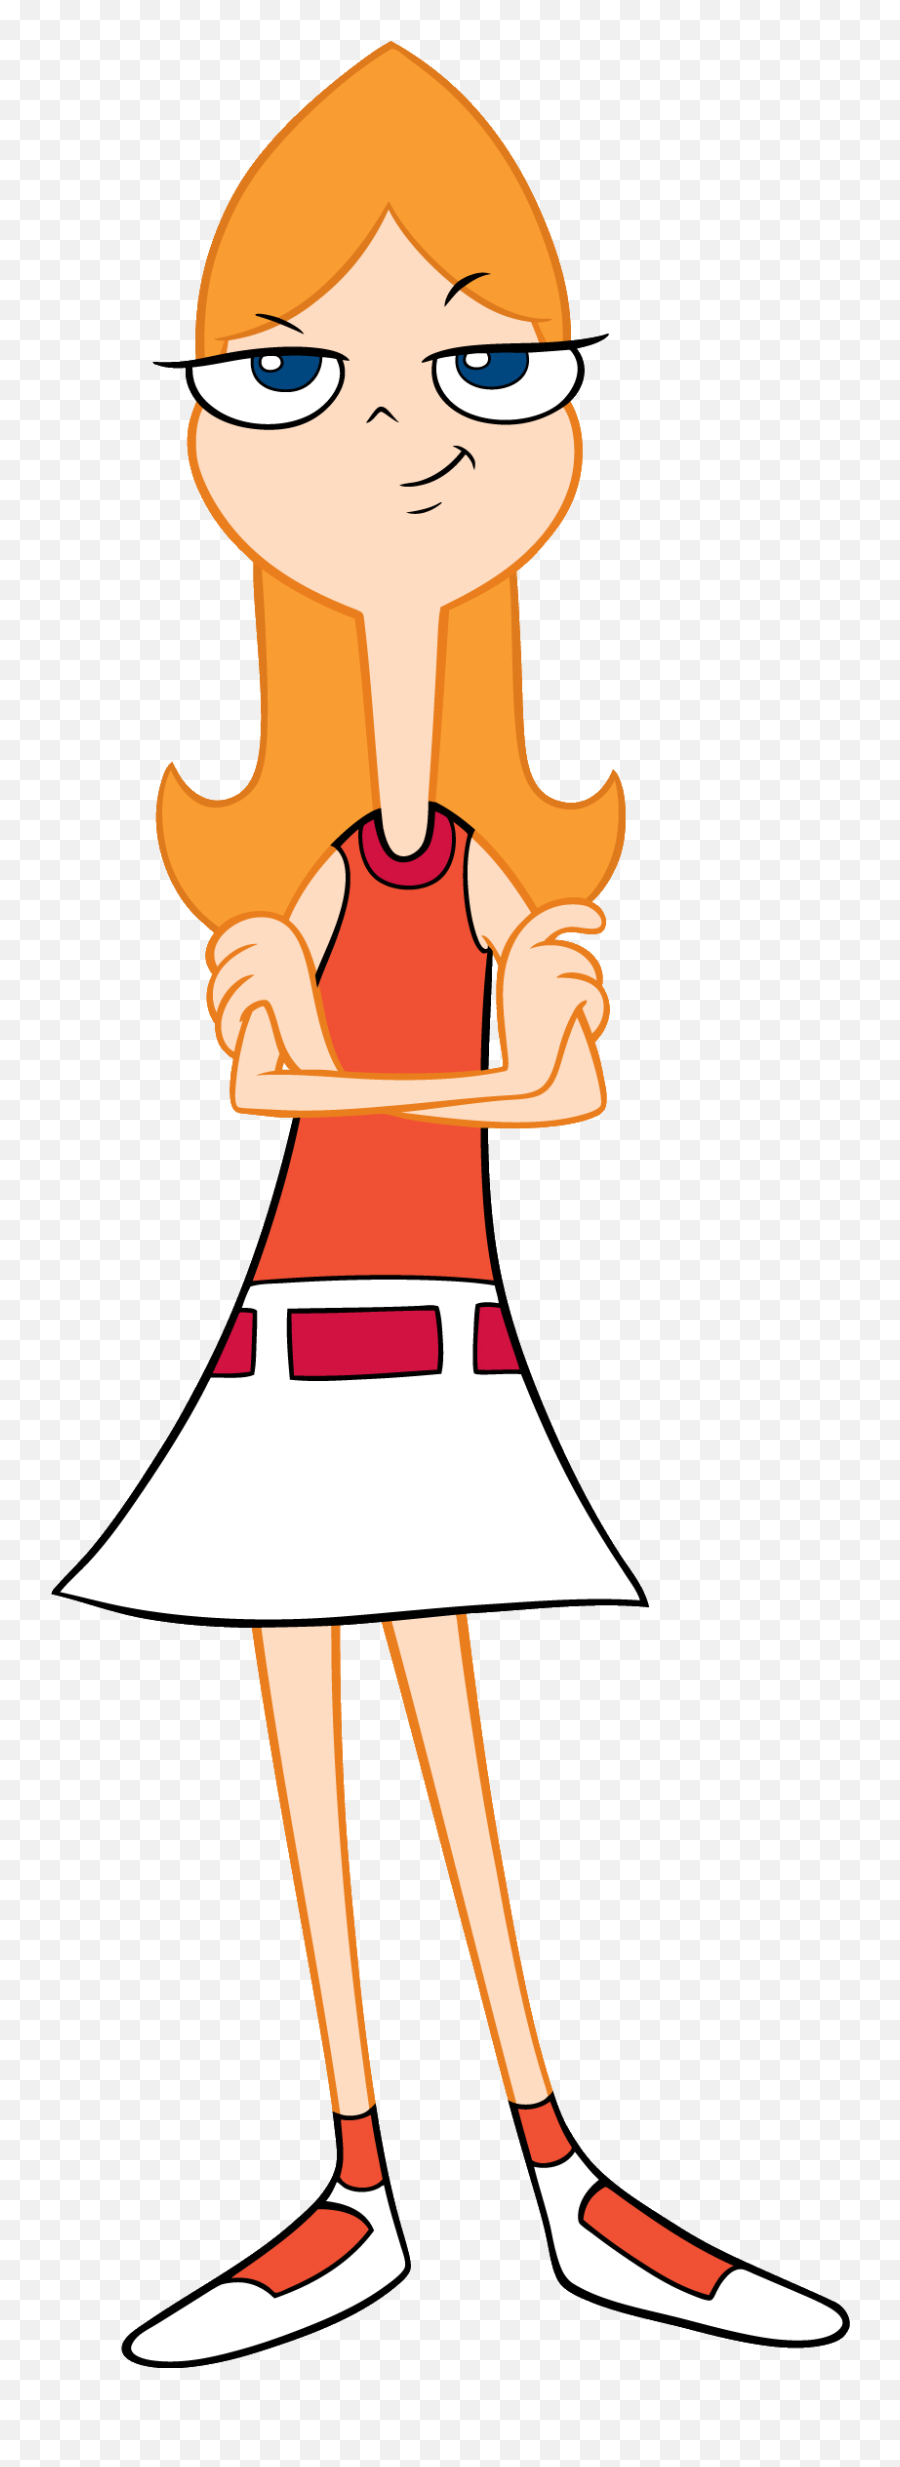 Main Characters - Candace Flynn Emoji,Phineas And Ferb Jeremy Character Emotions